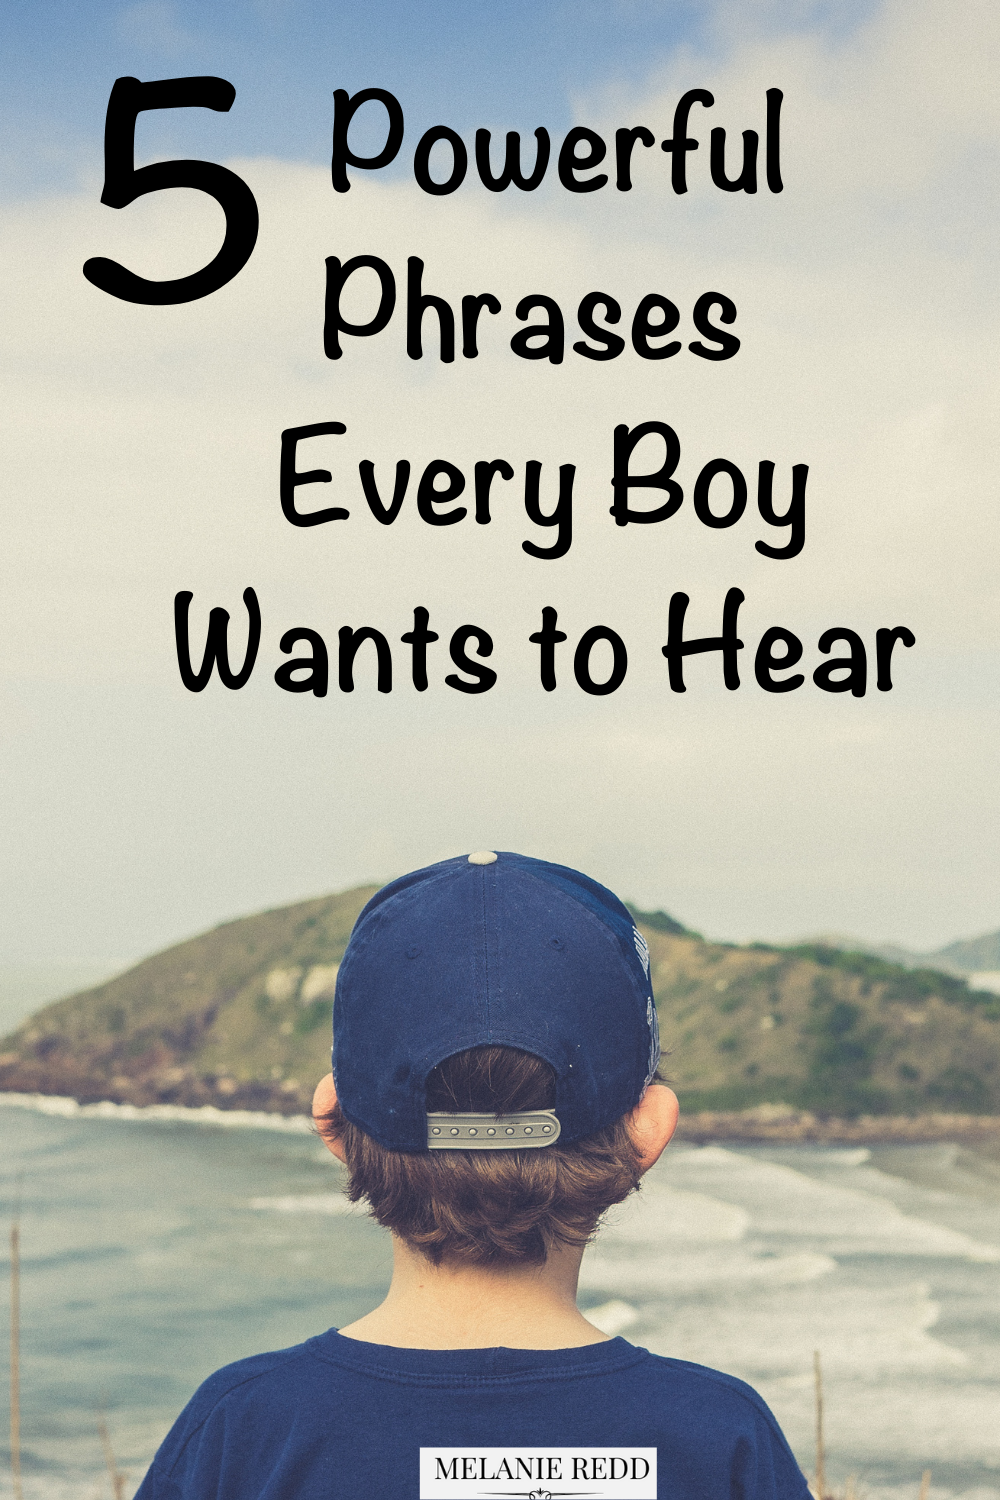 Although they may not show it, boys need to hear positive words as much (or maybe more than) girls. Here are 5 Powerful Phrases Every Boy Wants to Hear. #boys#raisingboys #raisingsons #encouragingboys